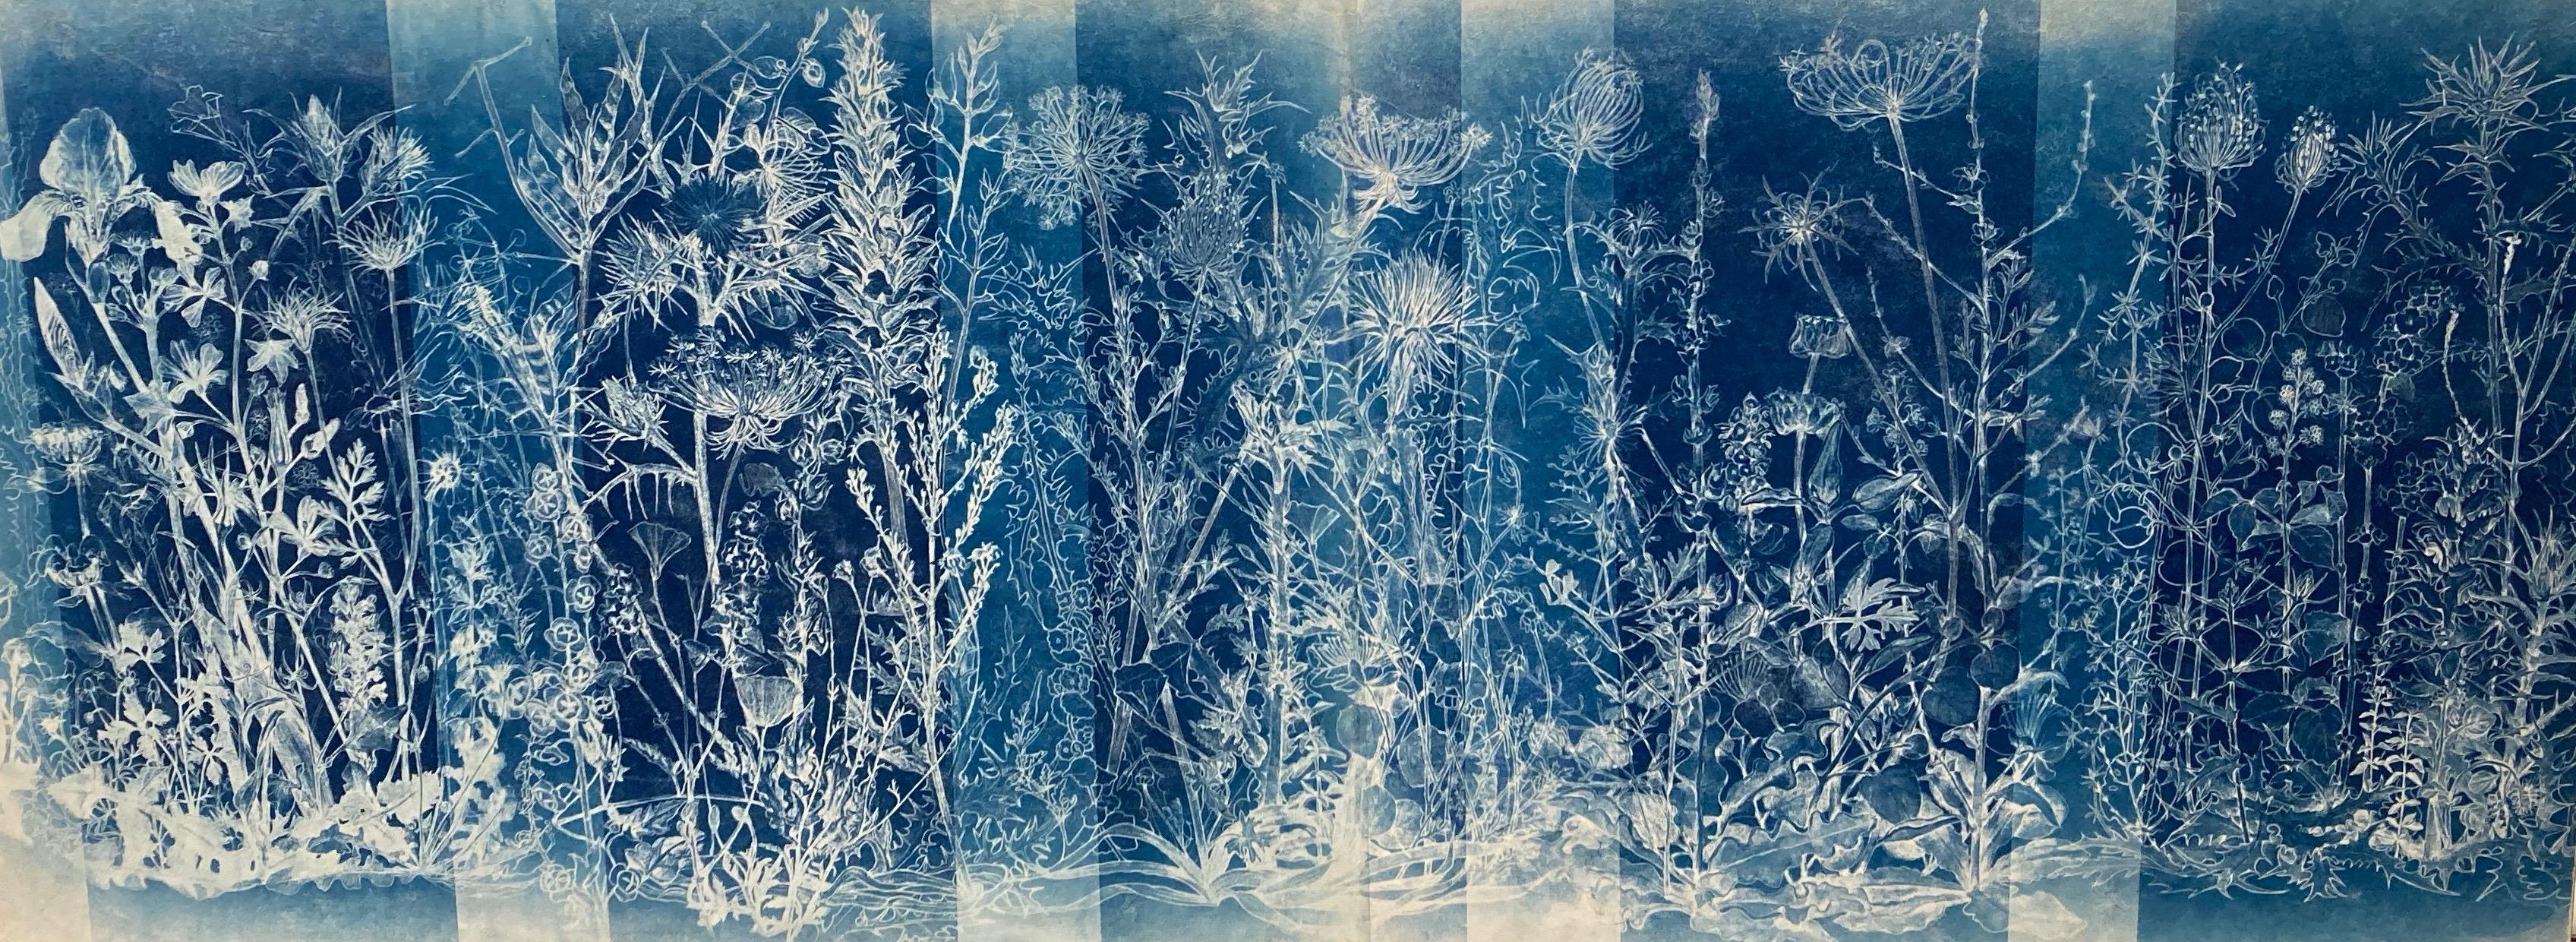 Judith Allen-Efstathiou Landscape Print - "Mapping the Walk - May to August"  Photographic Flower Study in Blue and White